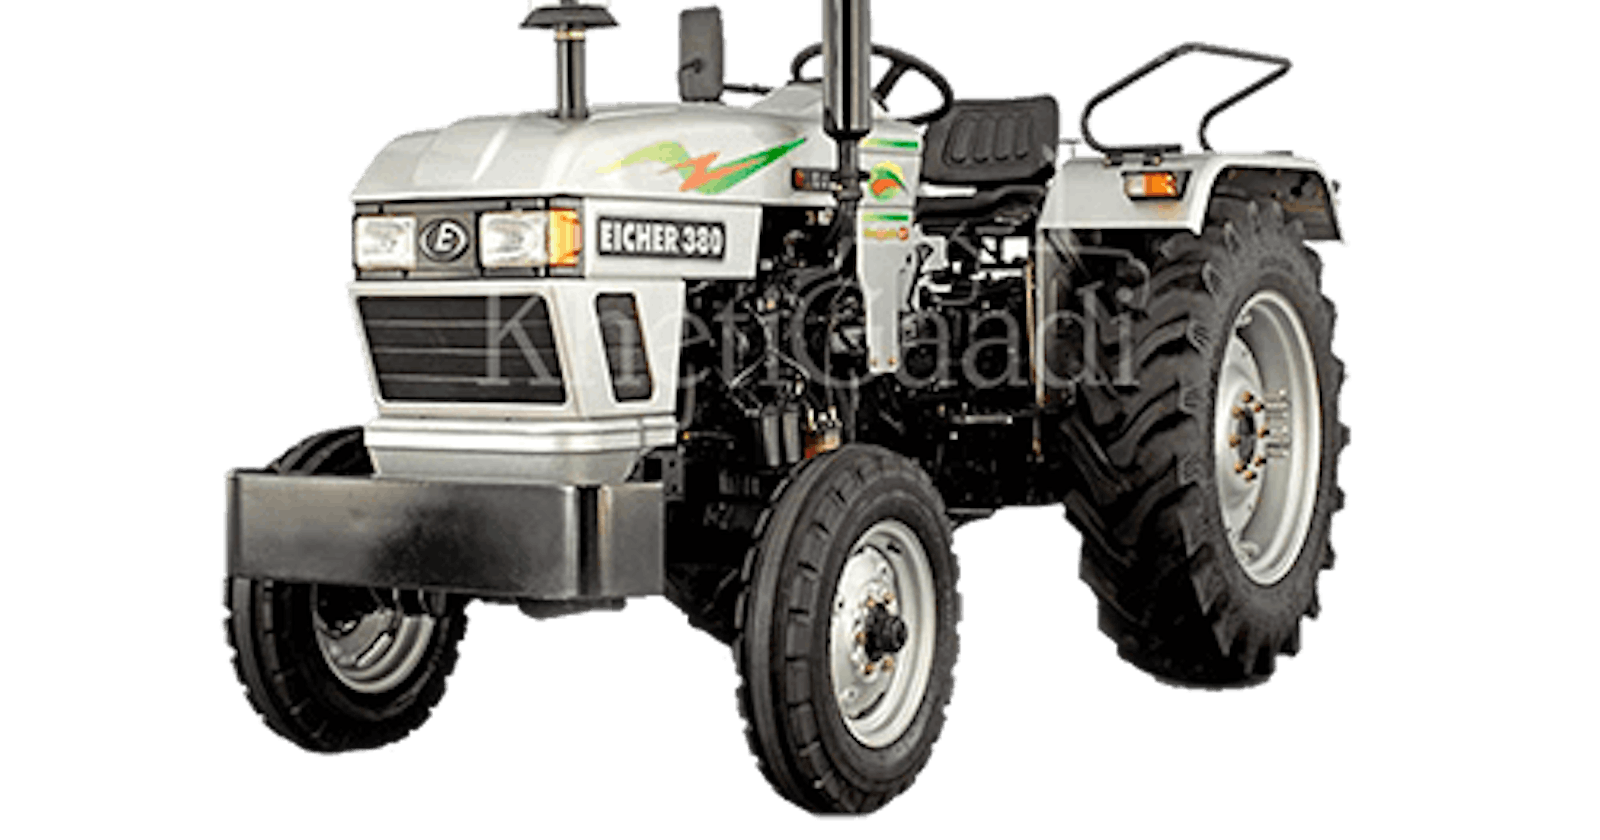 Eicher 380 Tractor Price, Specifications, and Overview- Khetigaadi 2022